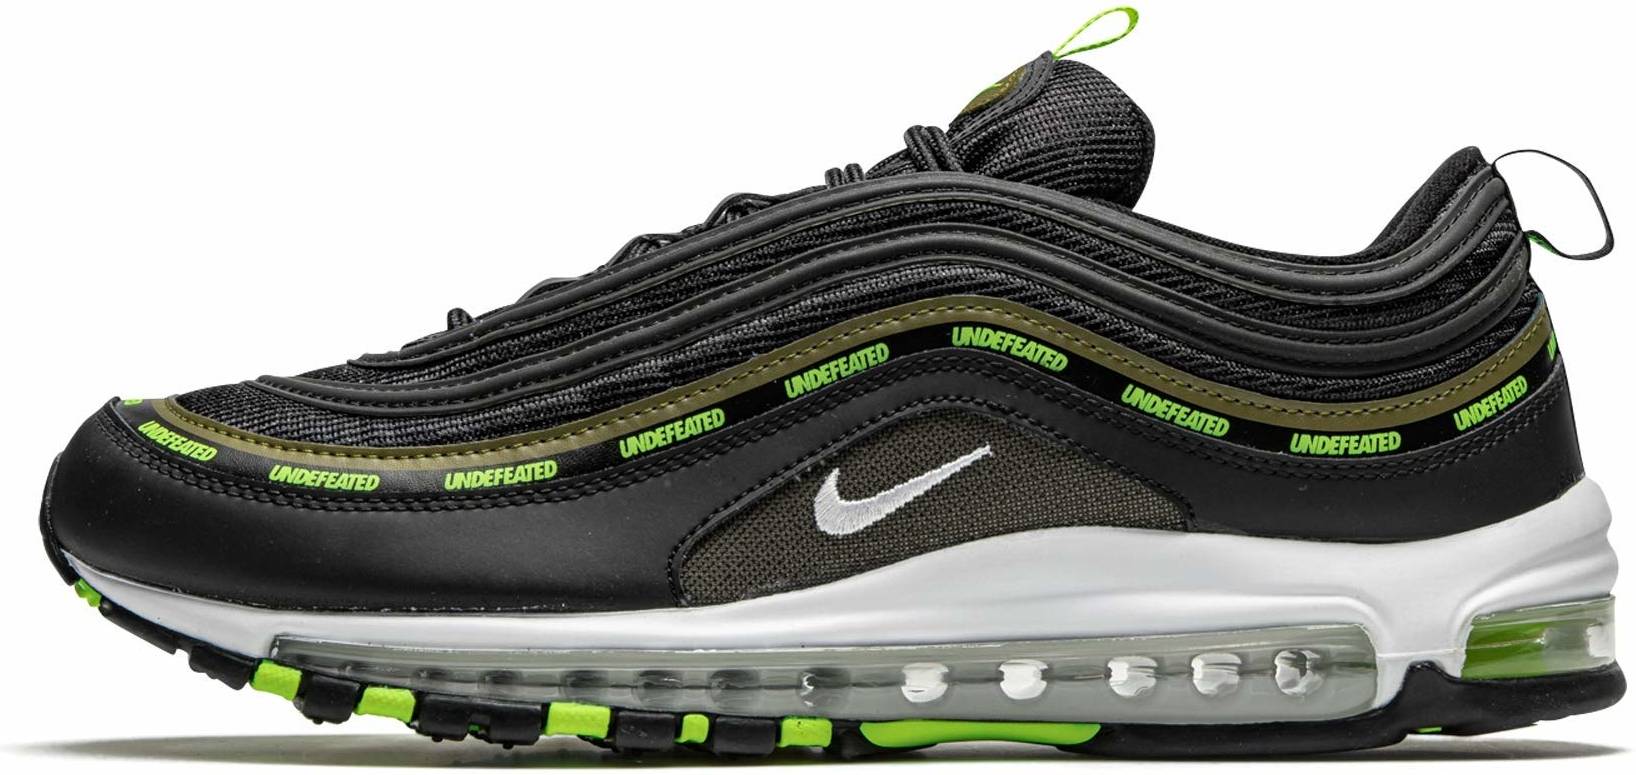 Nike Air Max 97 x Undefeated sneakers in 4 colors (only $160 